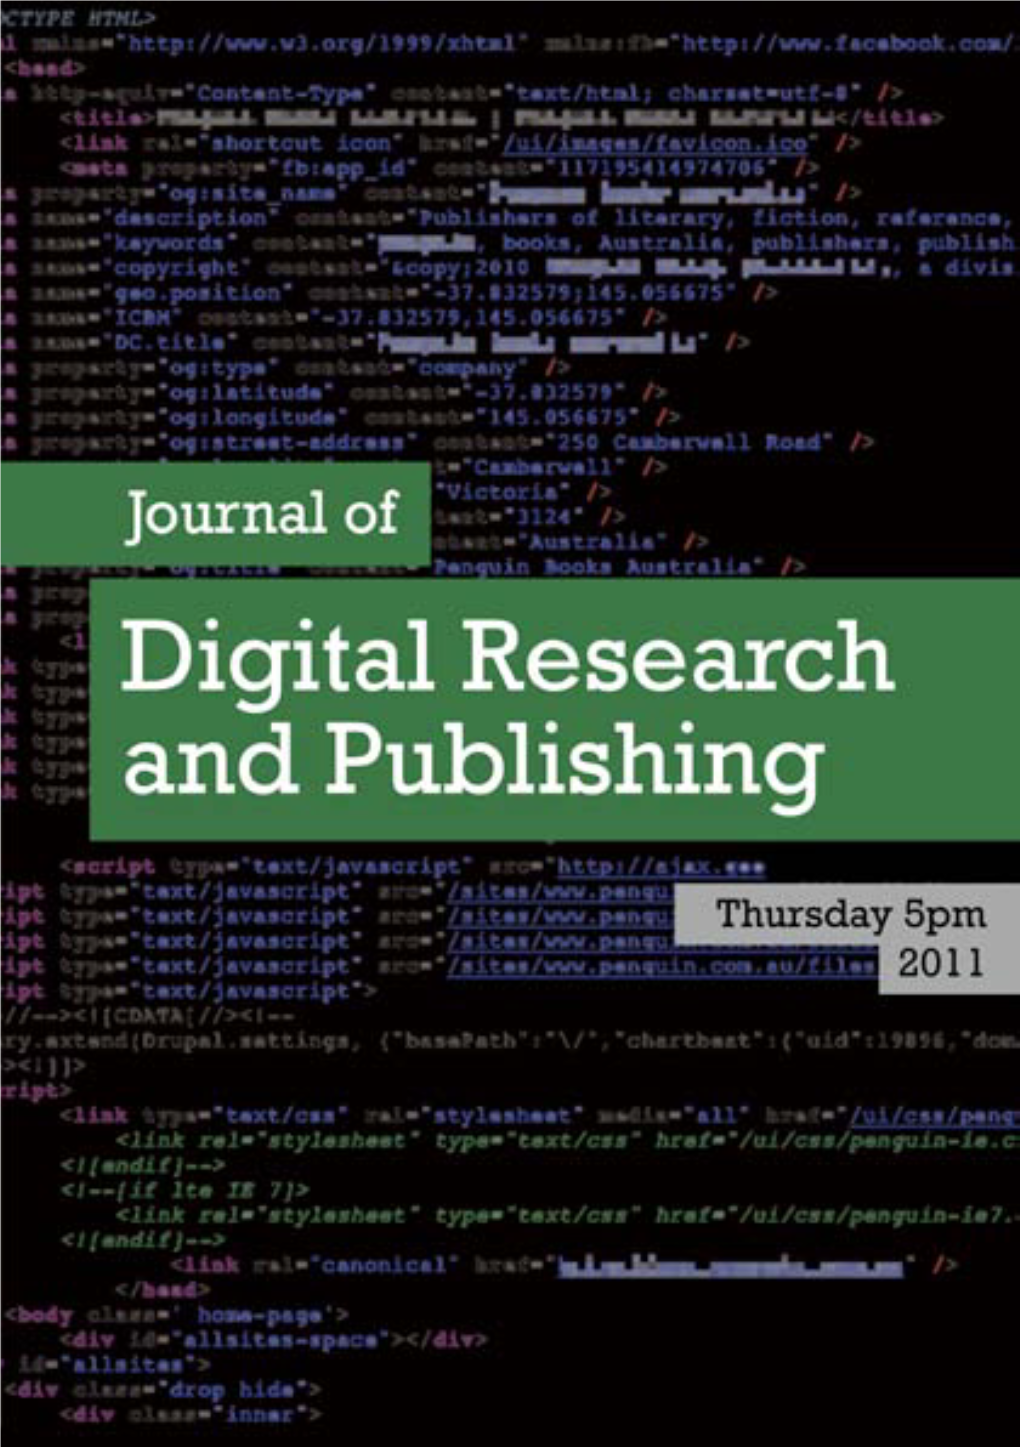 Journal of Digital Research & Publishing